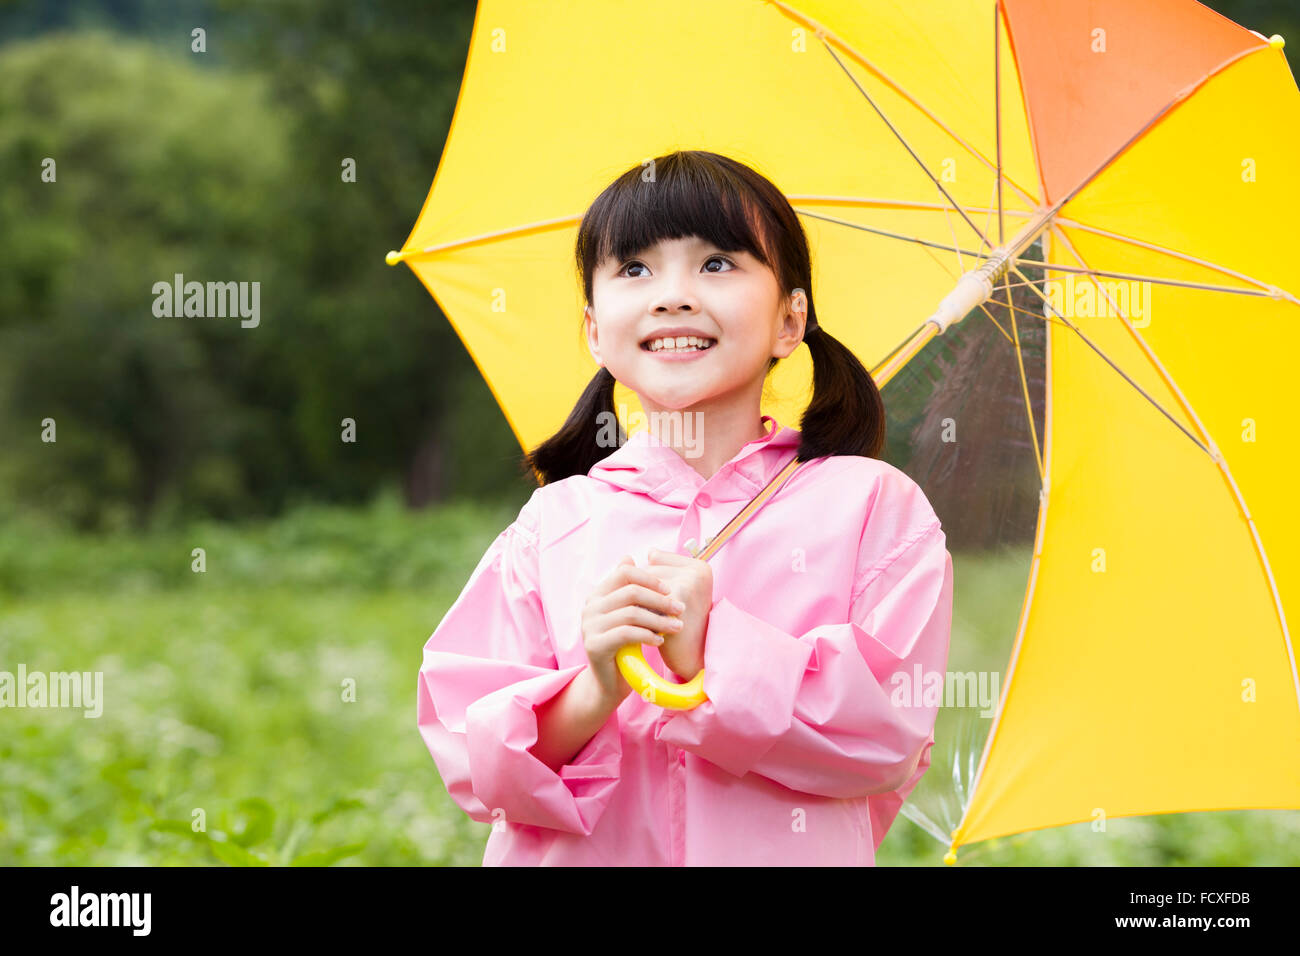 Girl in rain coat under an umbrella at field and looking up with a smile Stock Photo